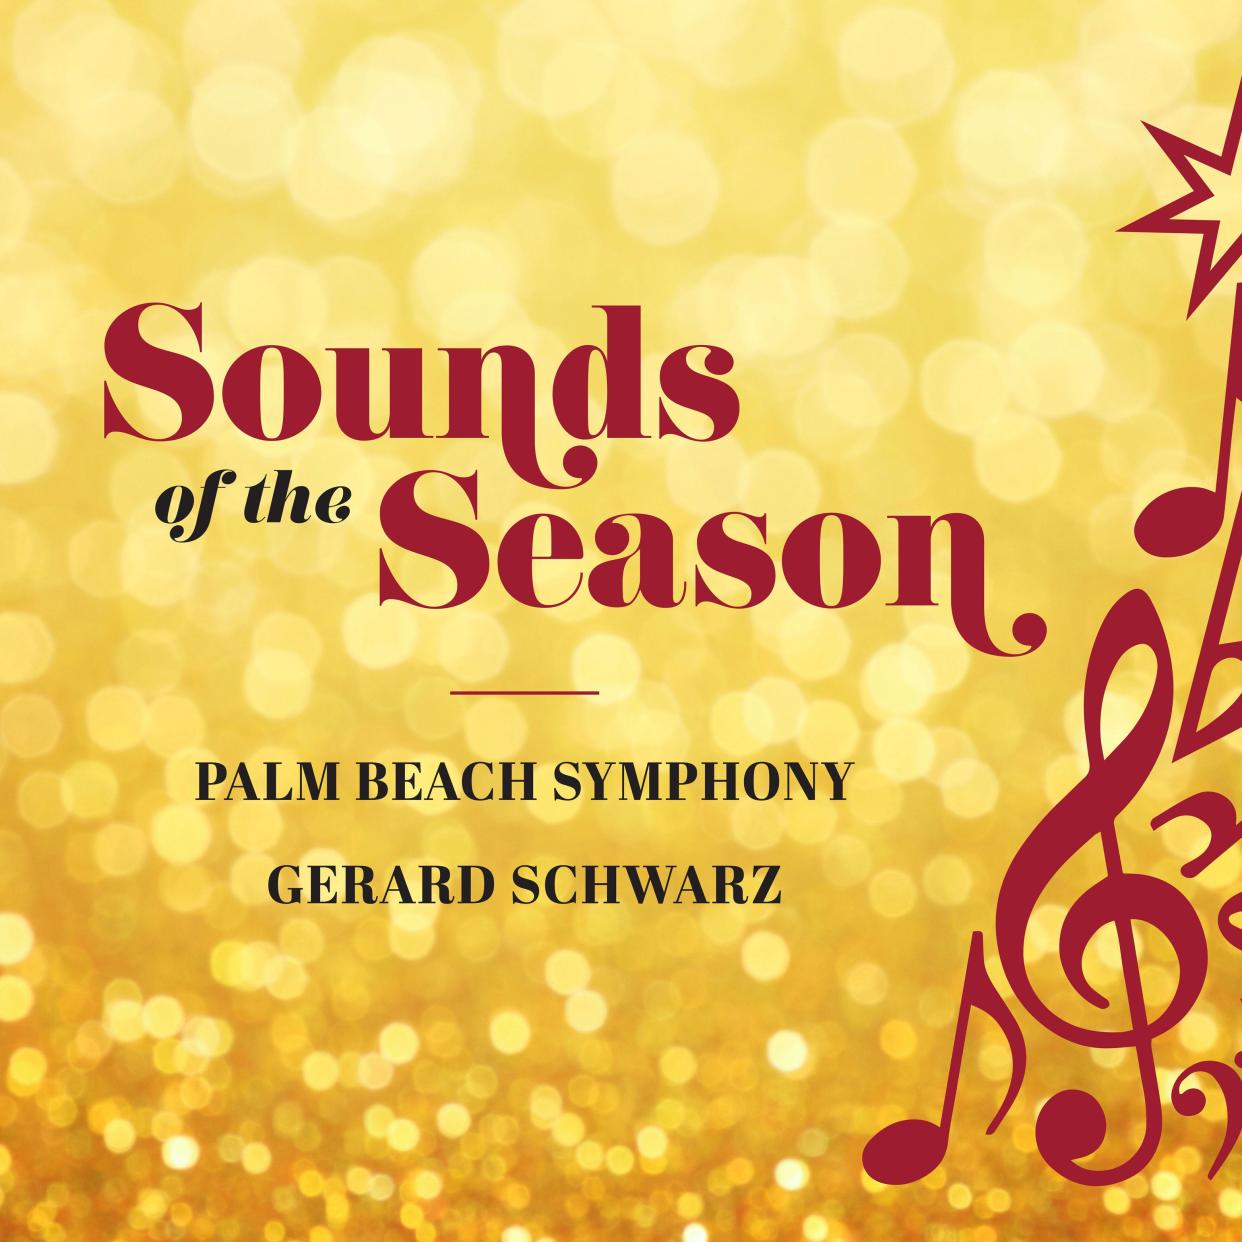 Palm Beach Symphony's “Sounds of the Season,” features holiday favorites from classical and popular music.